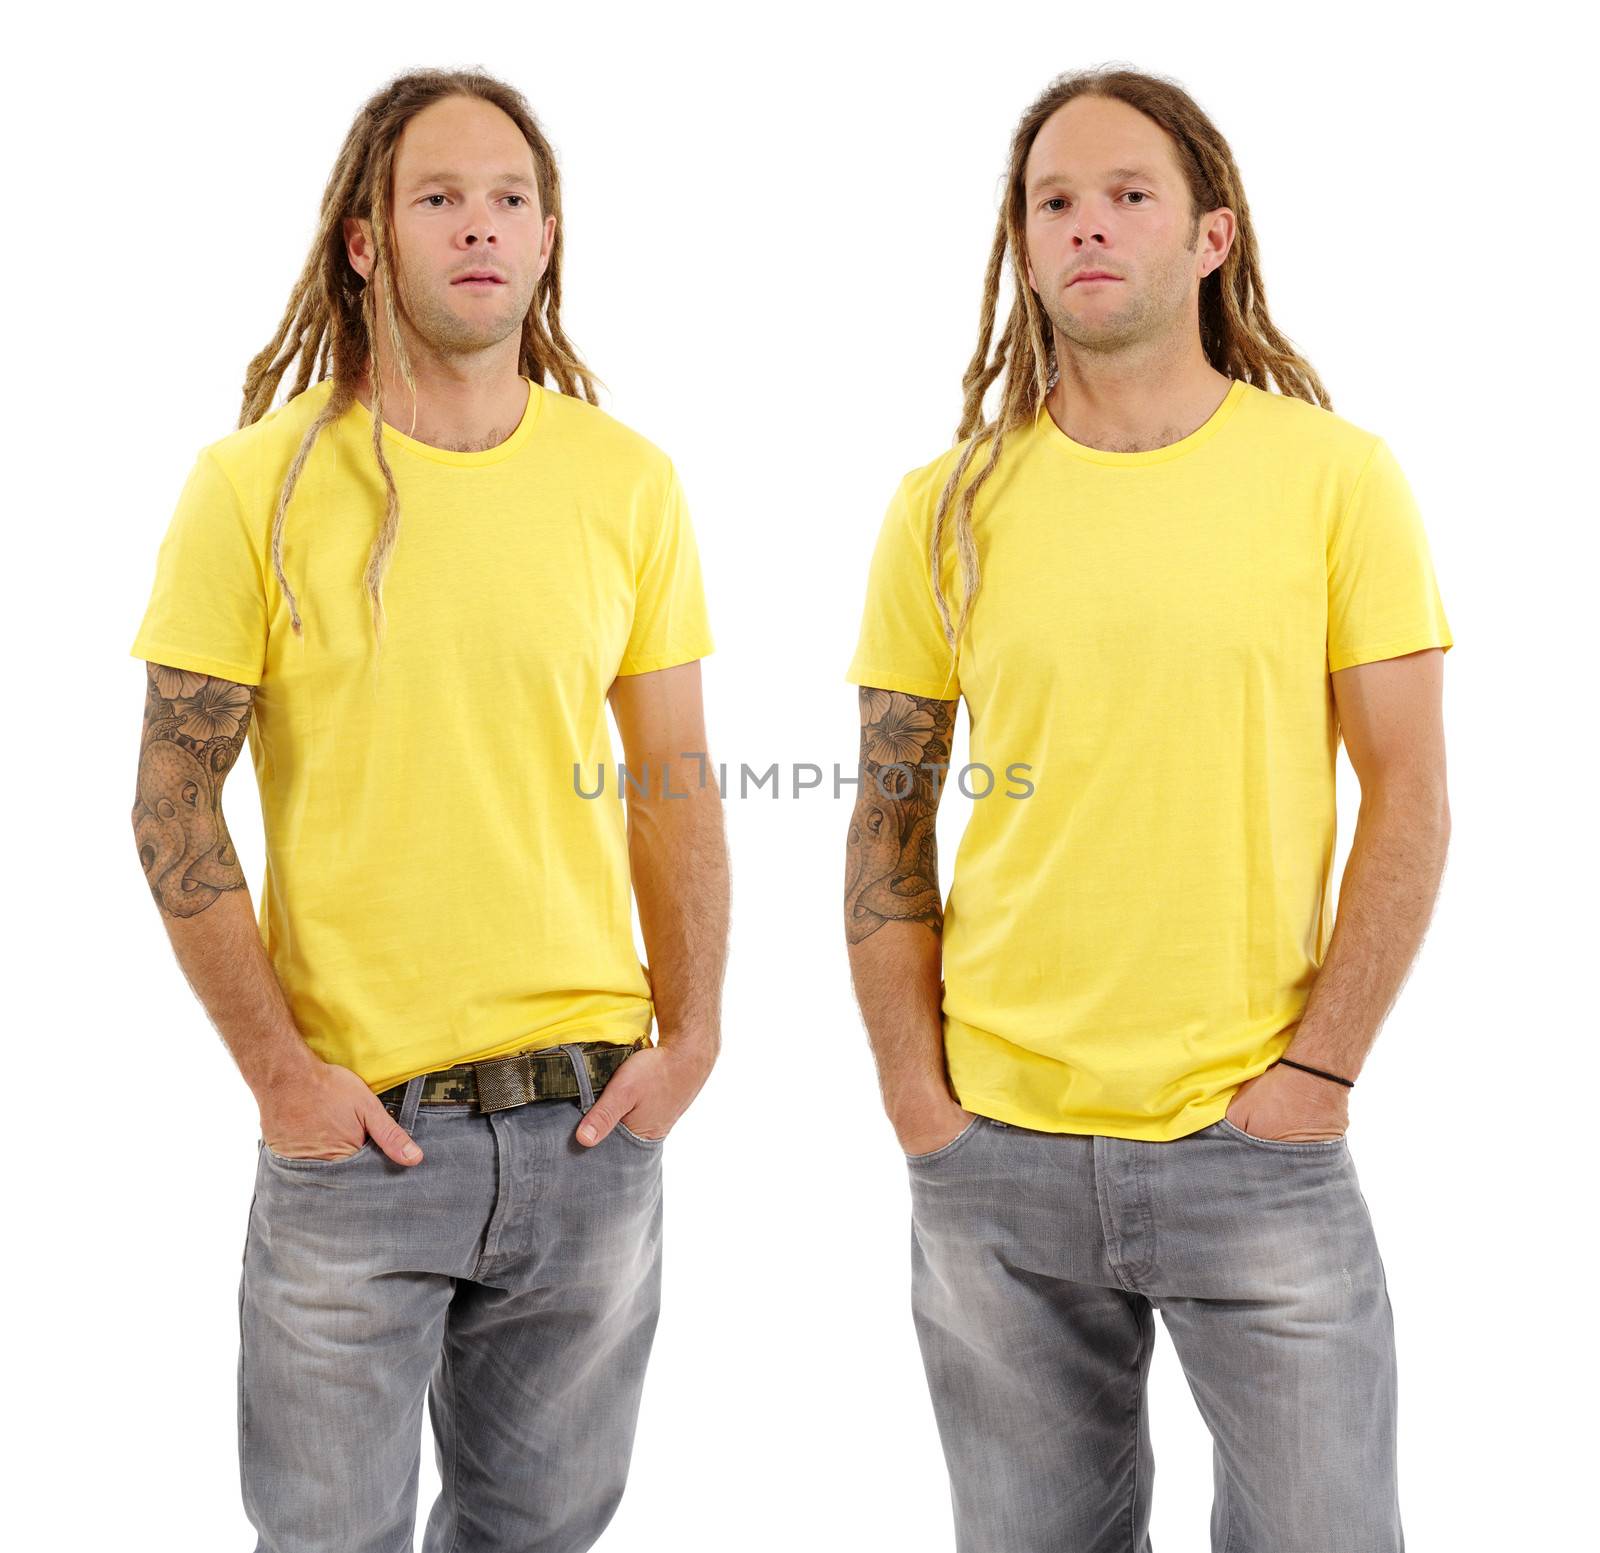 Male with blank yellow shirt and dreadlocks by sumners